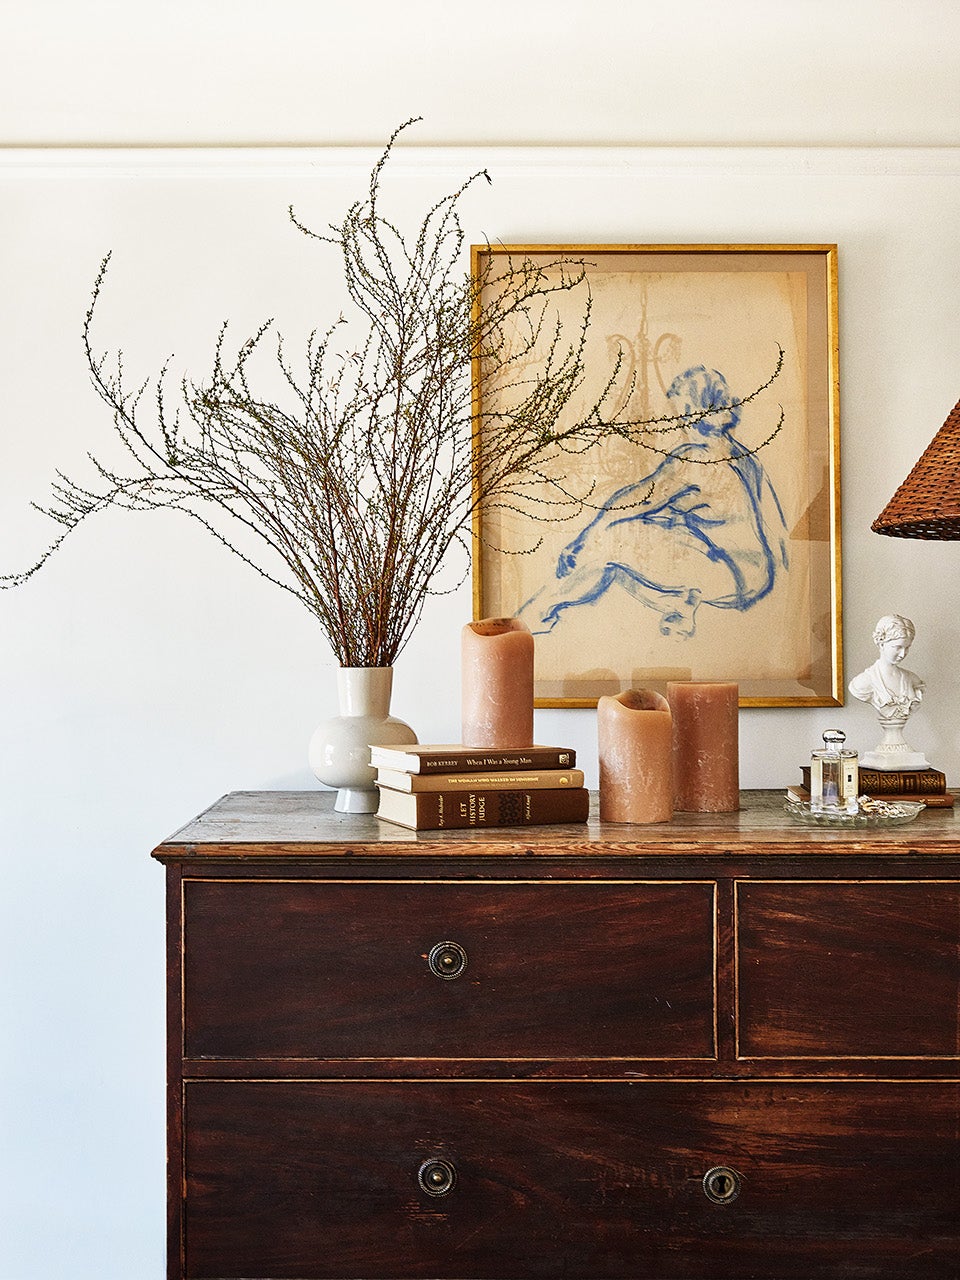 Dresser with branches in a vase